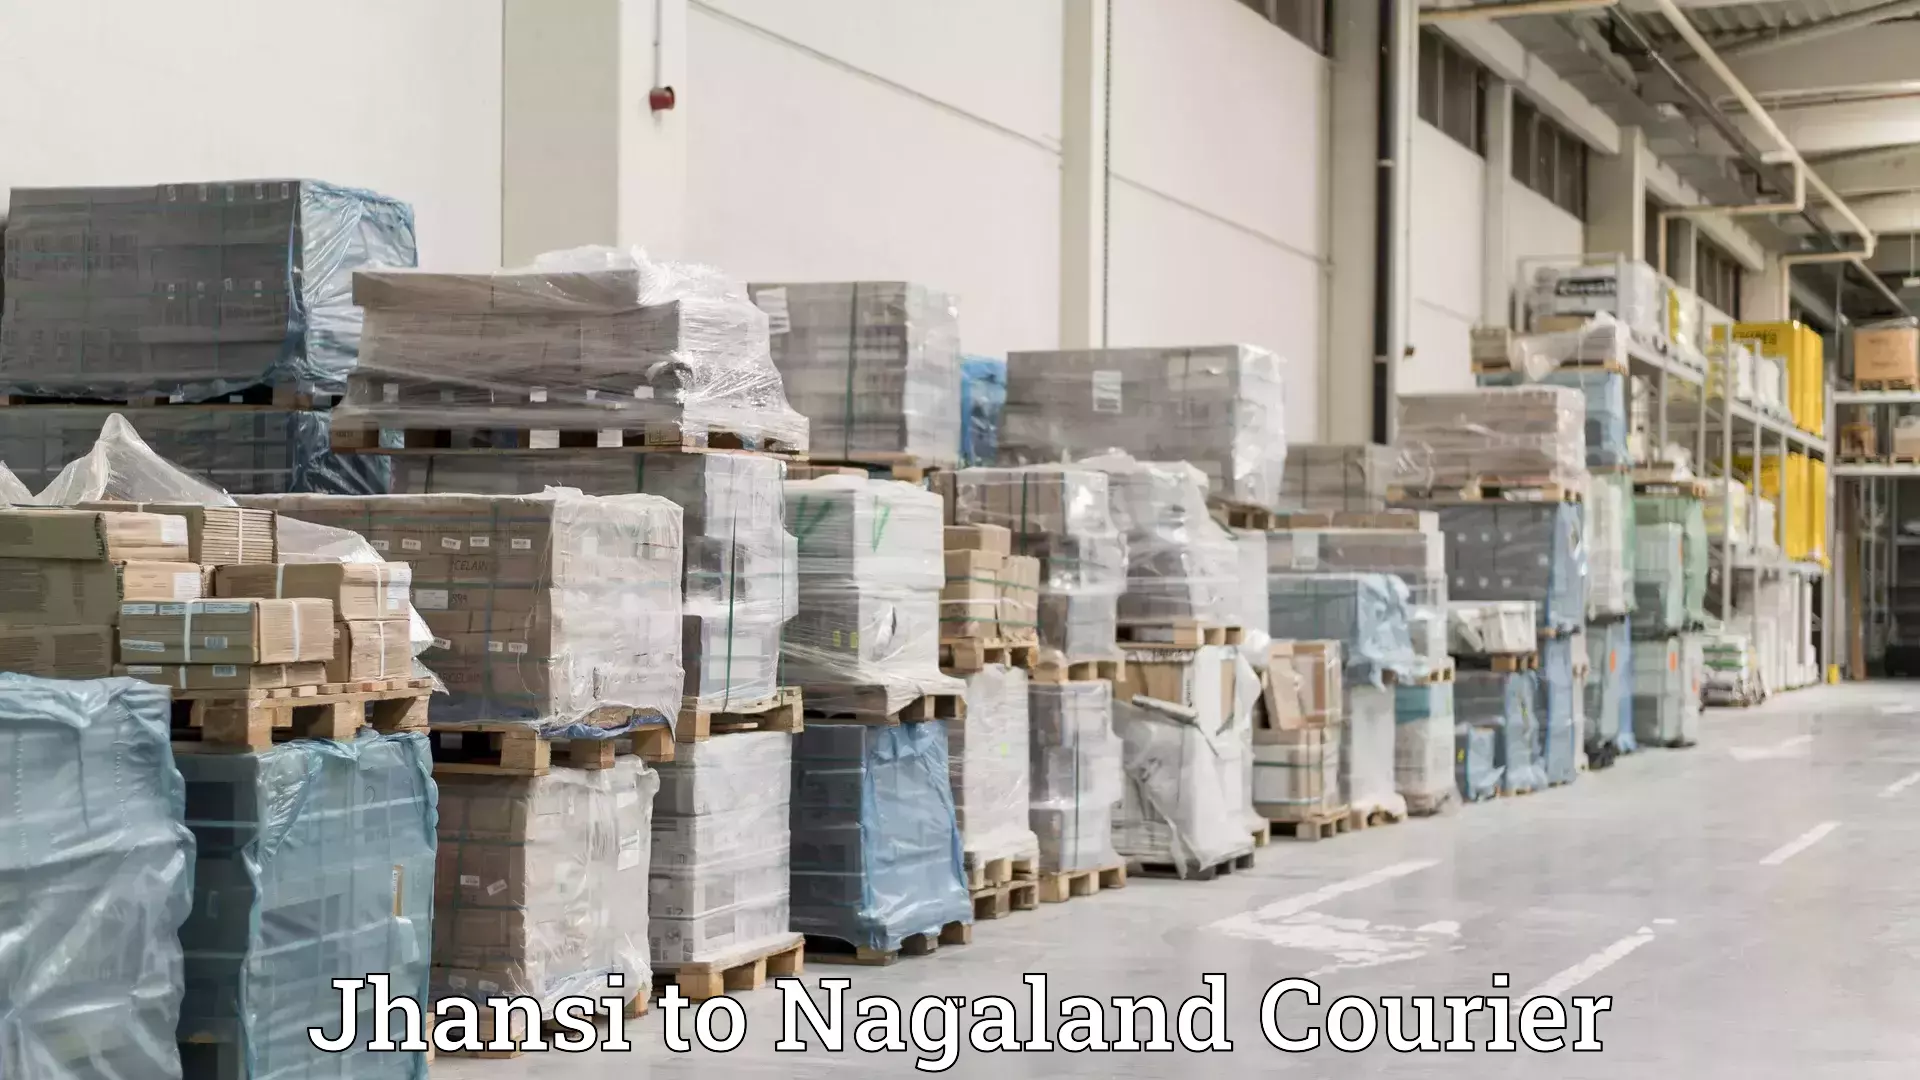 Comprehensive relocation services Jhansi to Nagaland